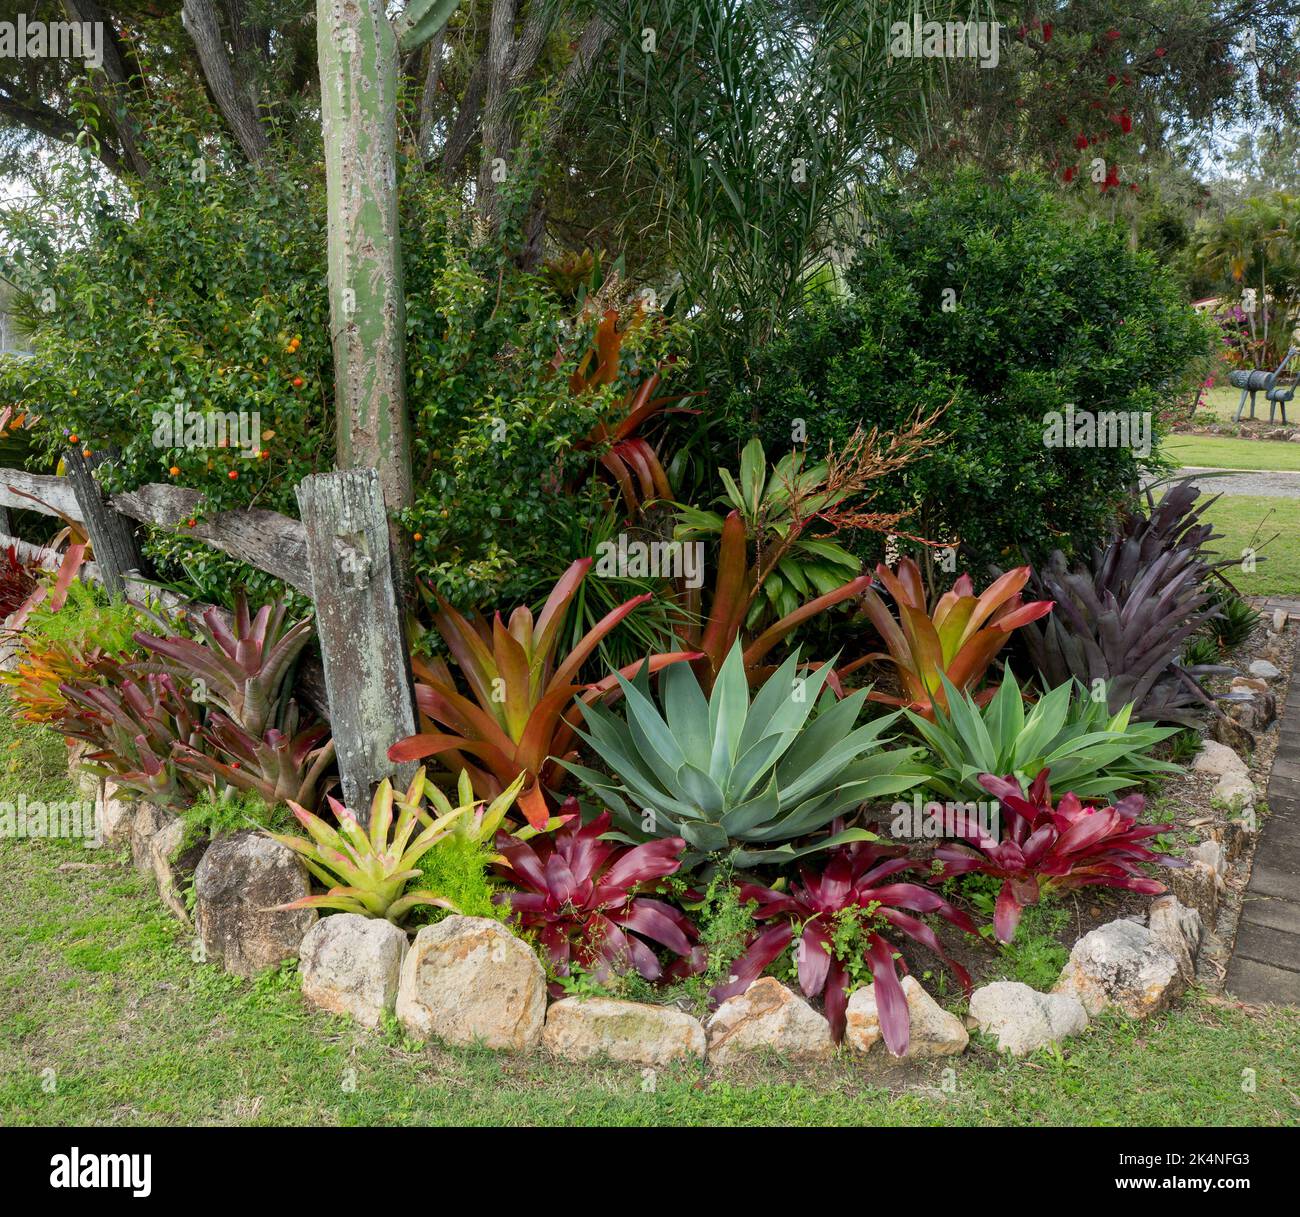 Garden bed with drought tolerant plants, succulents and bromeliads with colourful red and green foliage, edged with rocks, in Australia Stock Photo